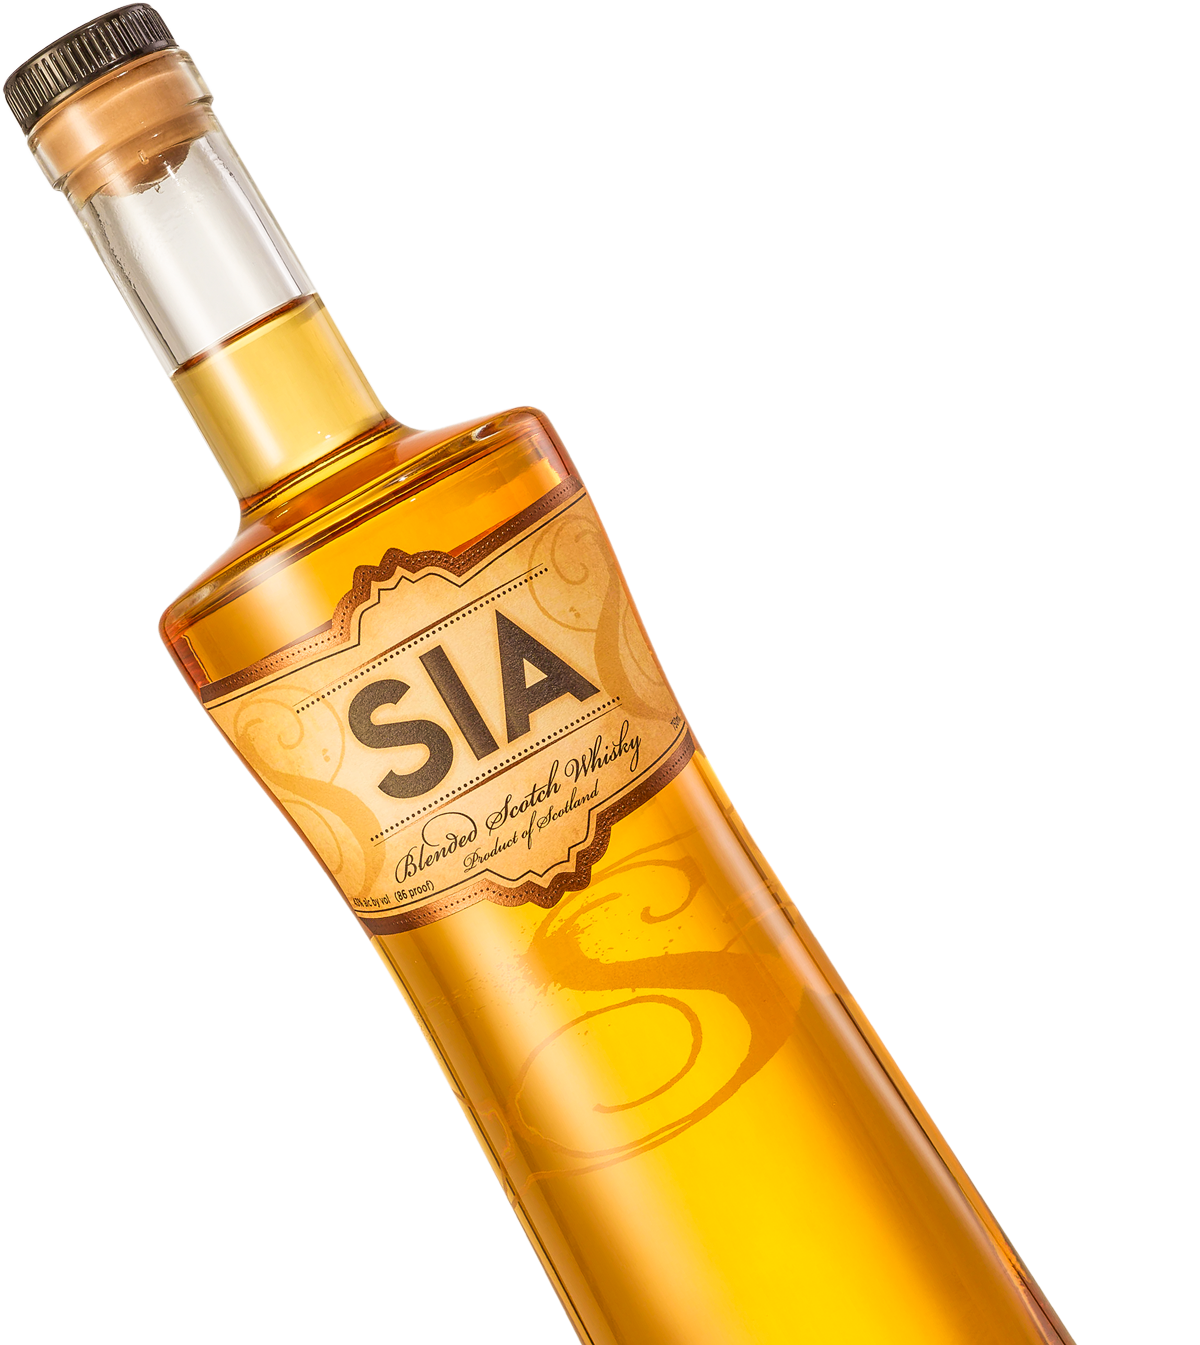 A bottle of SIA Blended Scotch Whisky